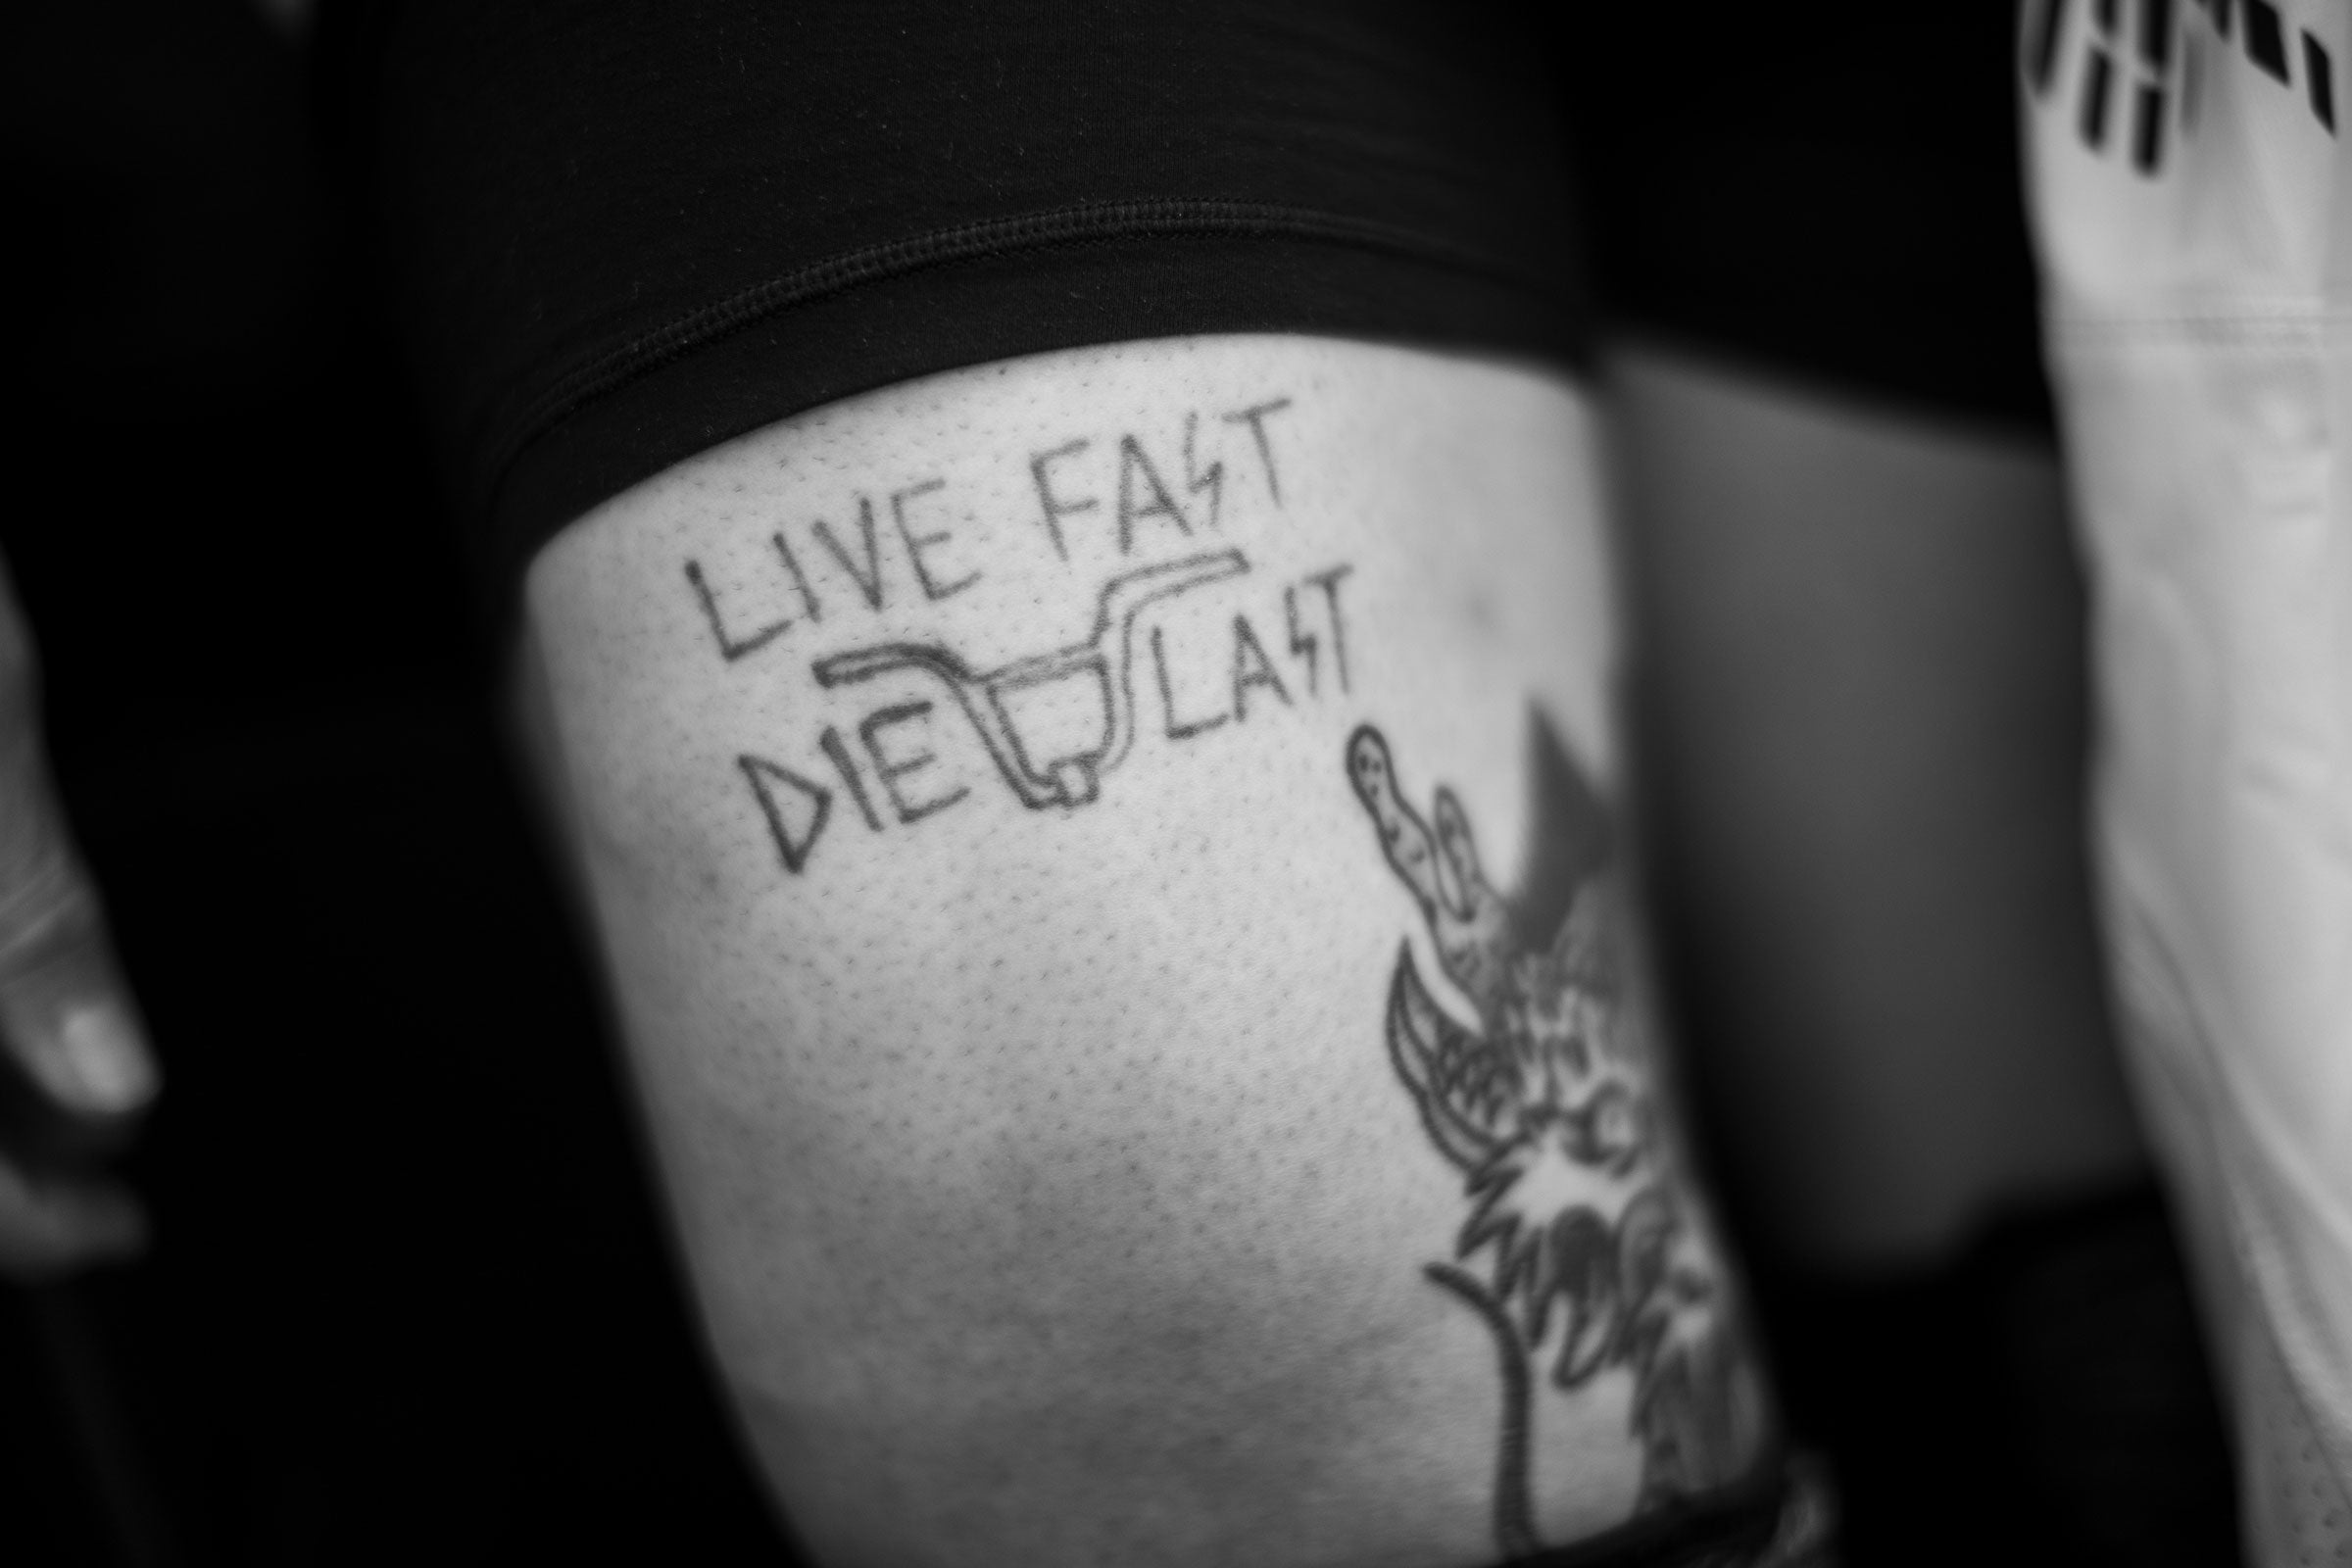 Brook’s mantra tattooed on his leg by his Aussie friend and fellow athlete Remy Morton.